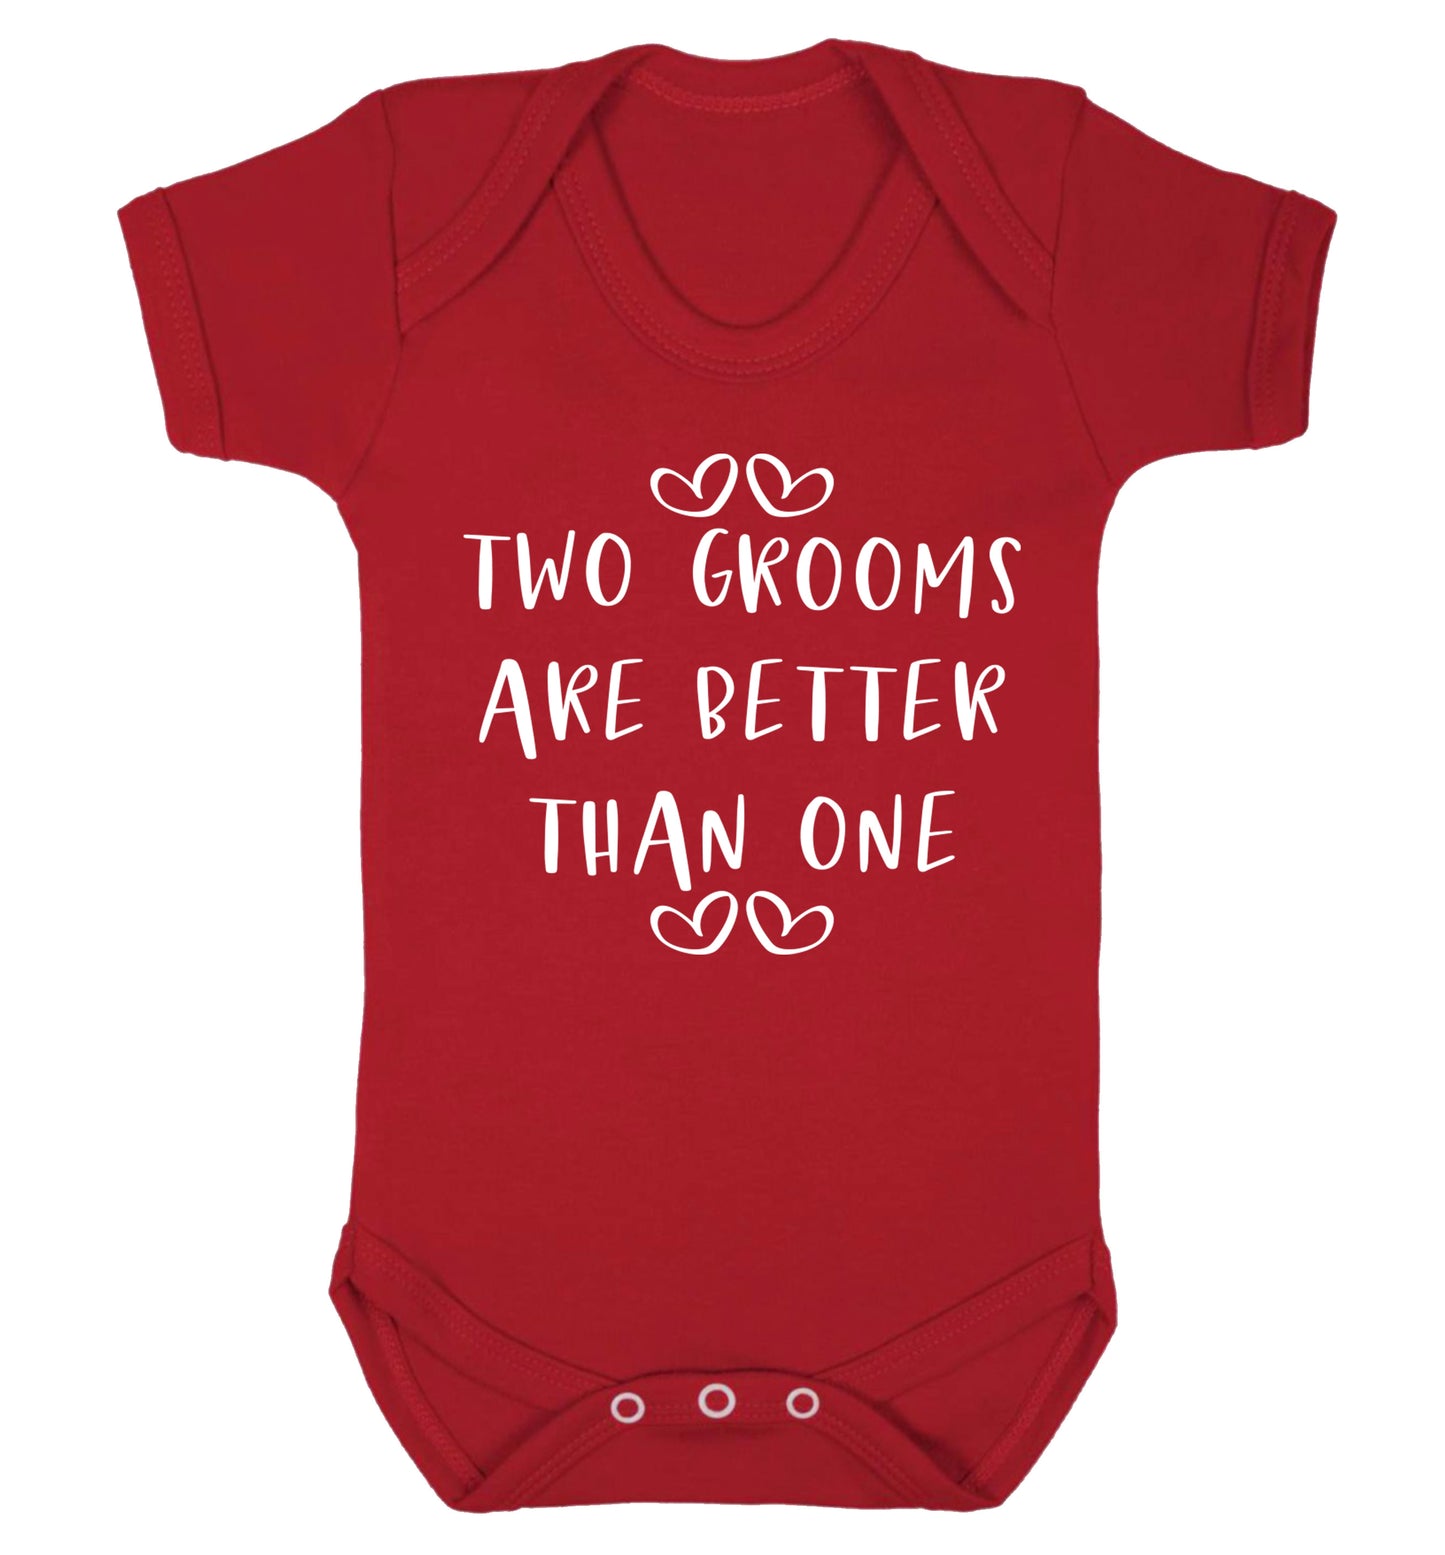 Two grooms are better than one baby vest red 18-24 months